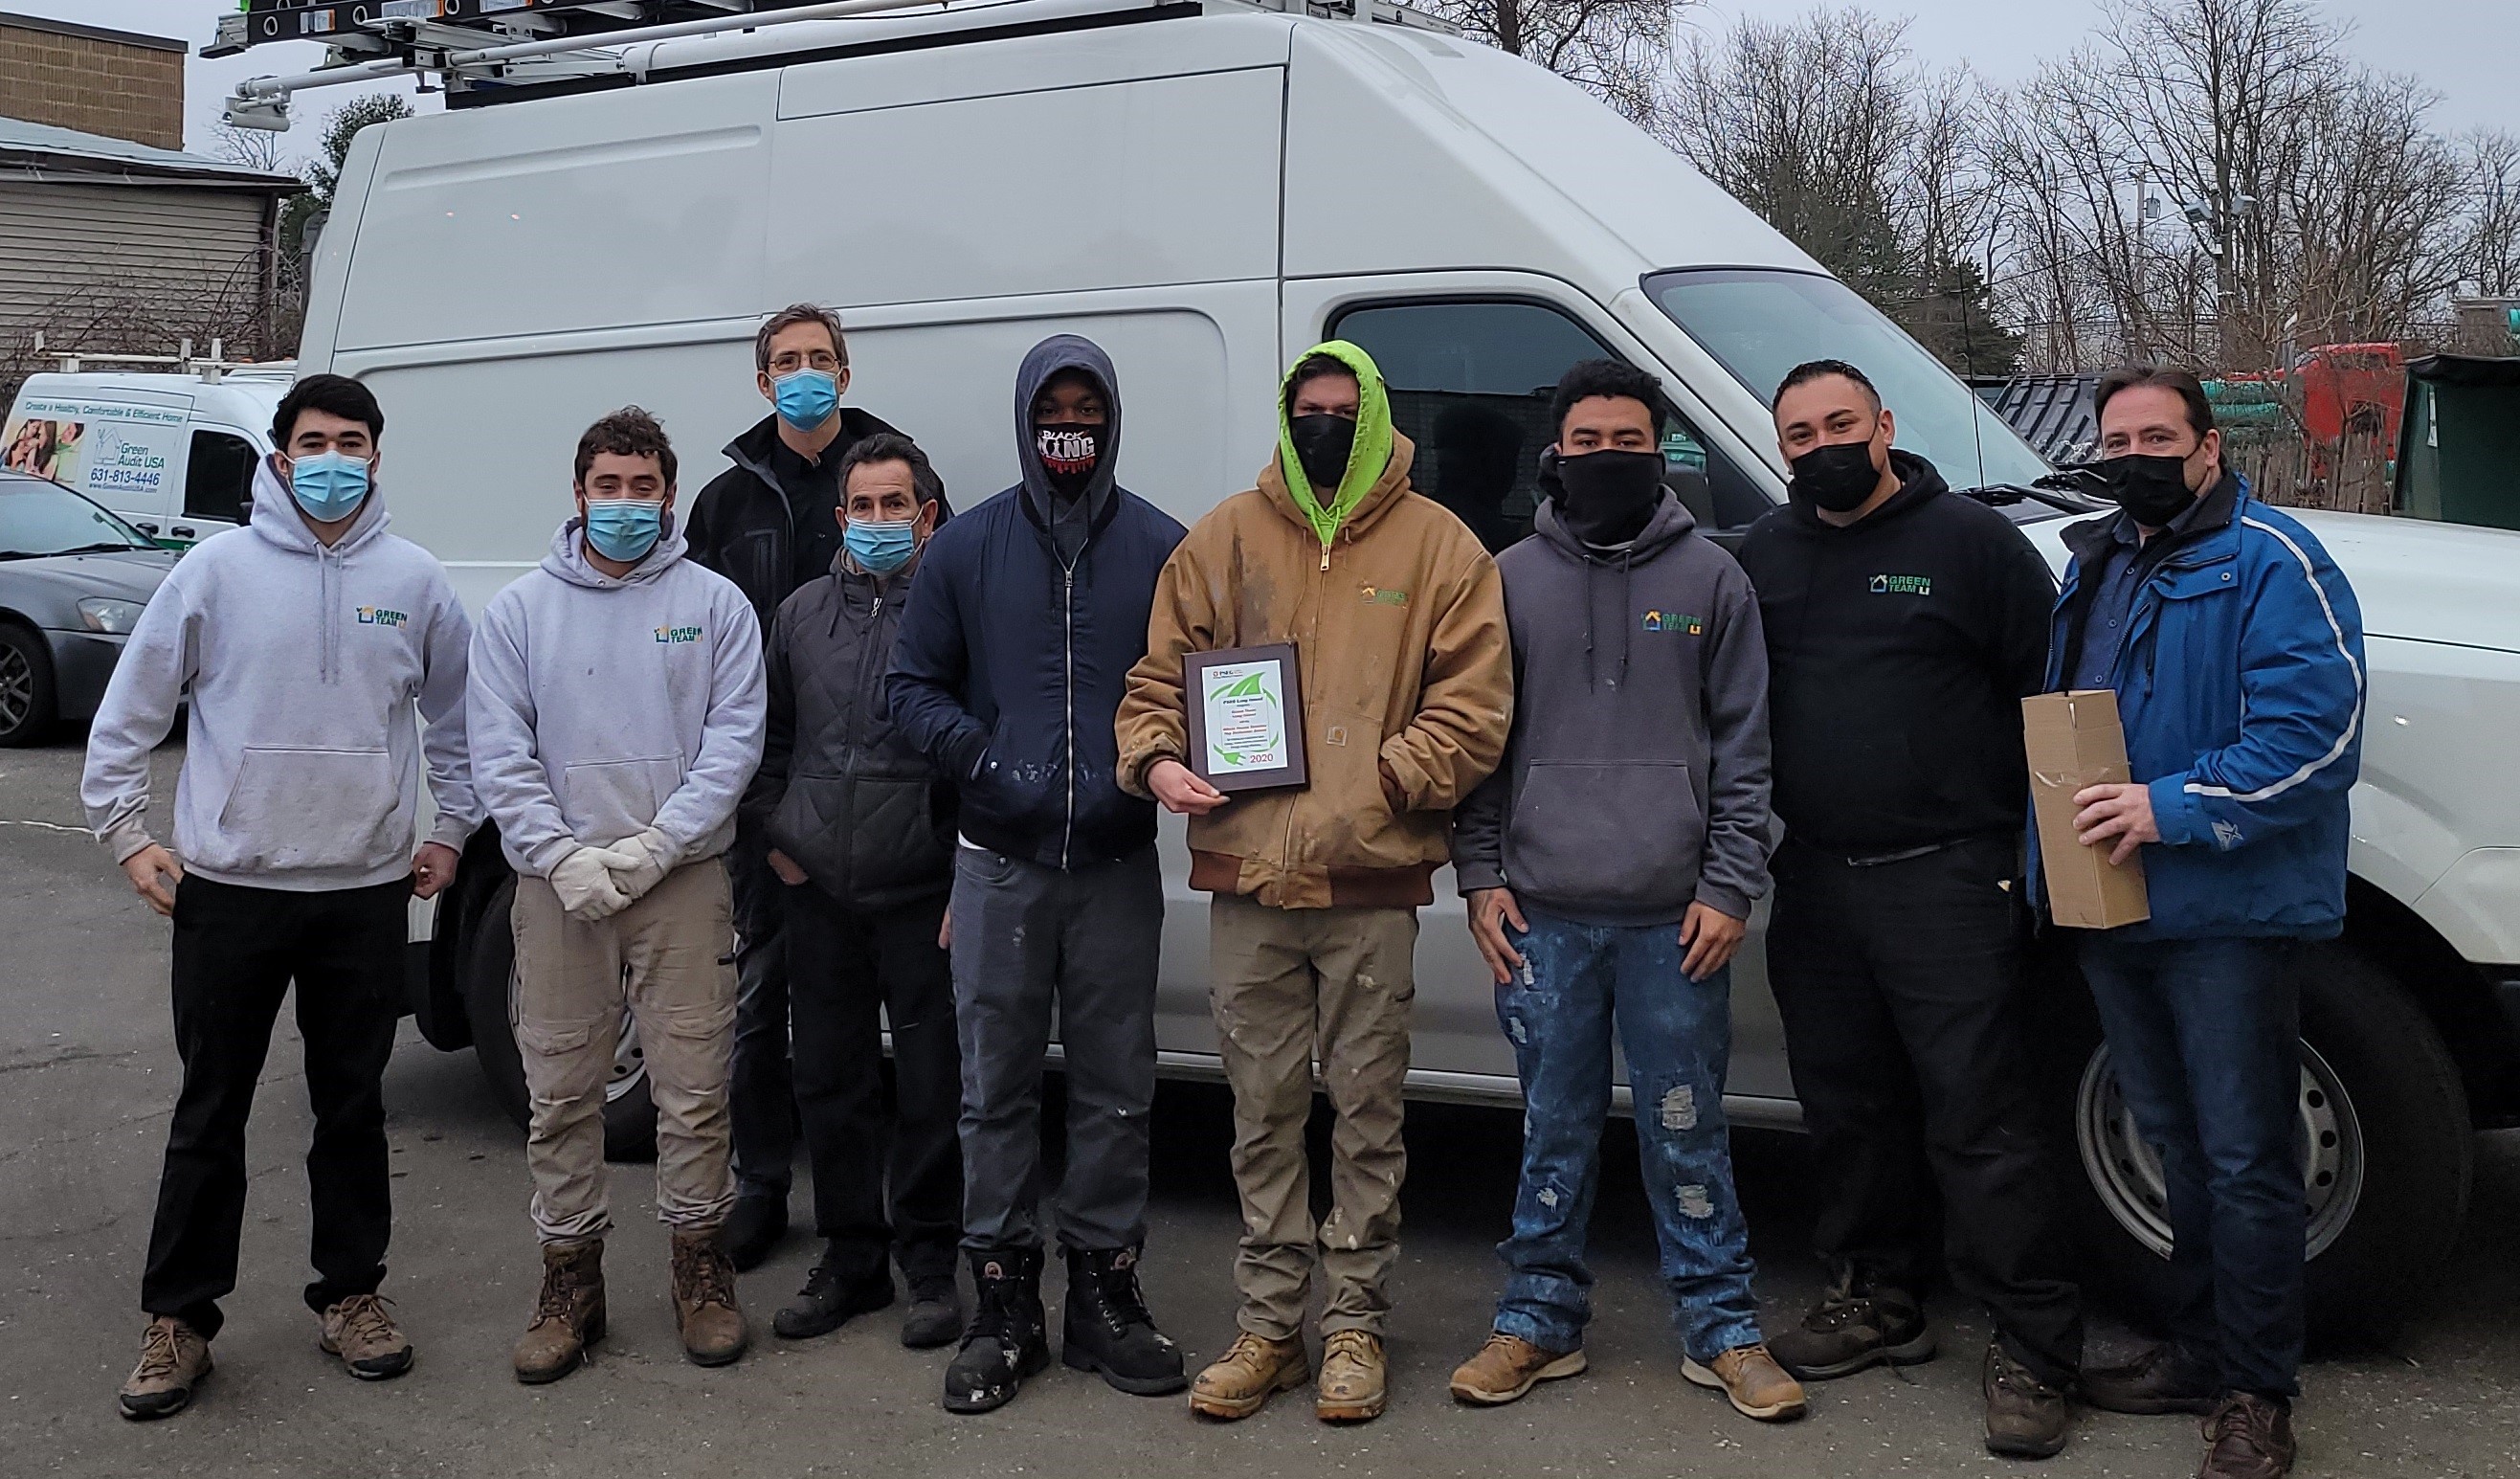 Employees of Green Team LI stand together in masks outside a van.